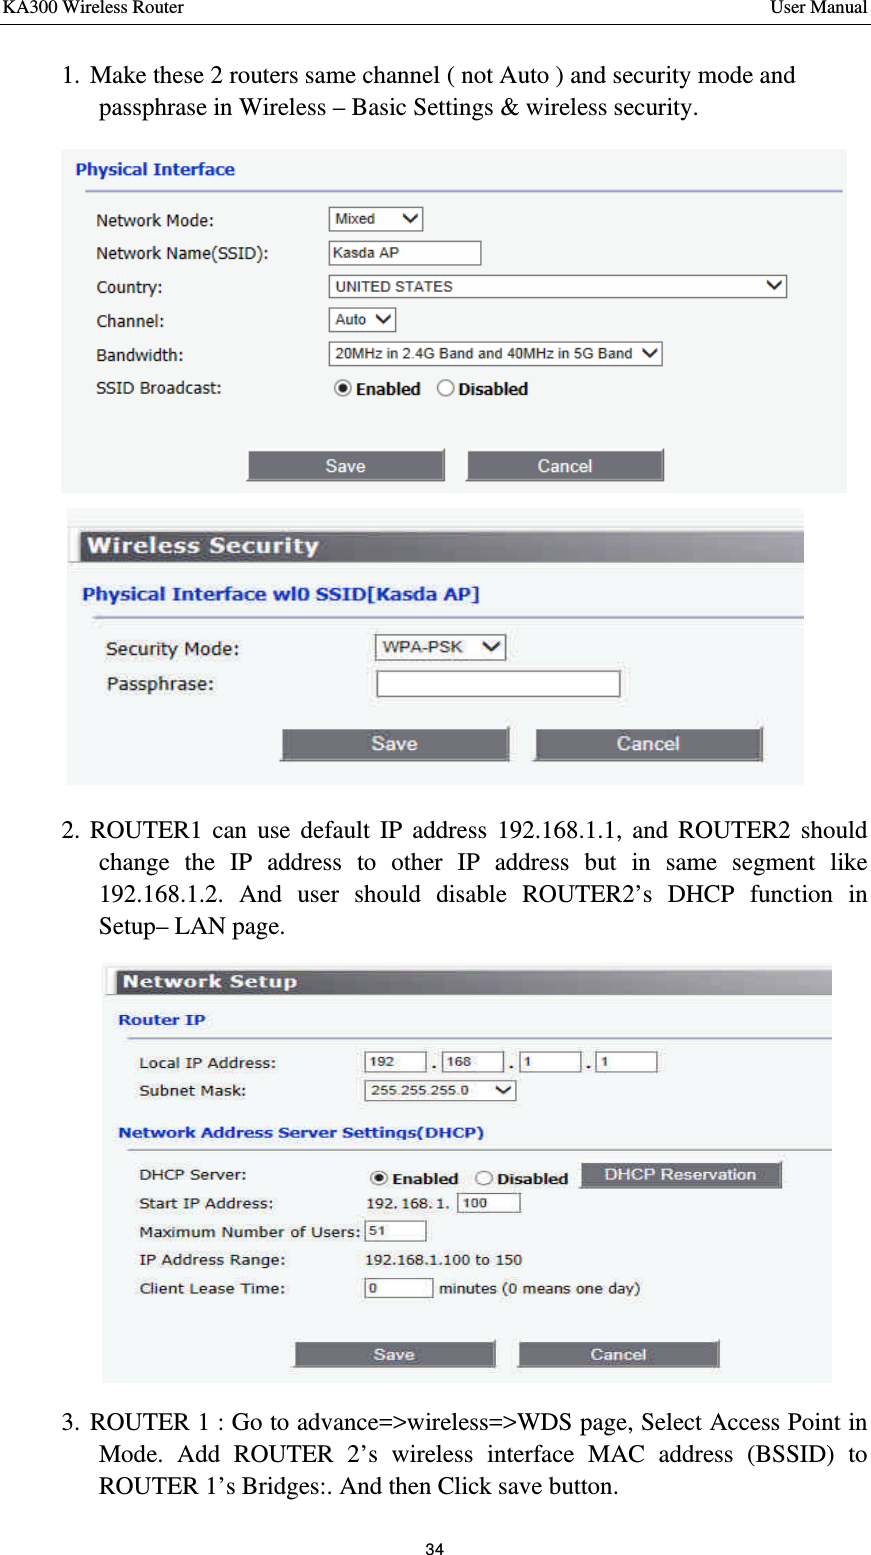 KA300 Wireless Router       User Manual 34  1. Make these 2 routers same channel ( not Auto ) and security mode and passphrase in Wireless – Basic Settings &amp; wireless security.  2. ROUTER1 can use default IP address 192.168.1.1, and ROUTER2 should change the IP address to other IP address but in same segment like 192.168.1.2. And user should disable ROUTER2’s DHCP function in Setup– LAN page.    3. ROUTER 1 : Go to advance=&gt;wireless=&gt;WDS page, Select Access Point in Mode. Add ROUTER 2’s wireless interface MAC address (BSSID) to ROUTER 1’s Bridges:. And then Click save button.    